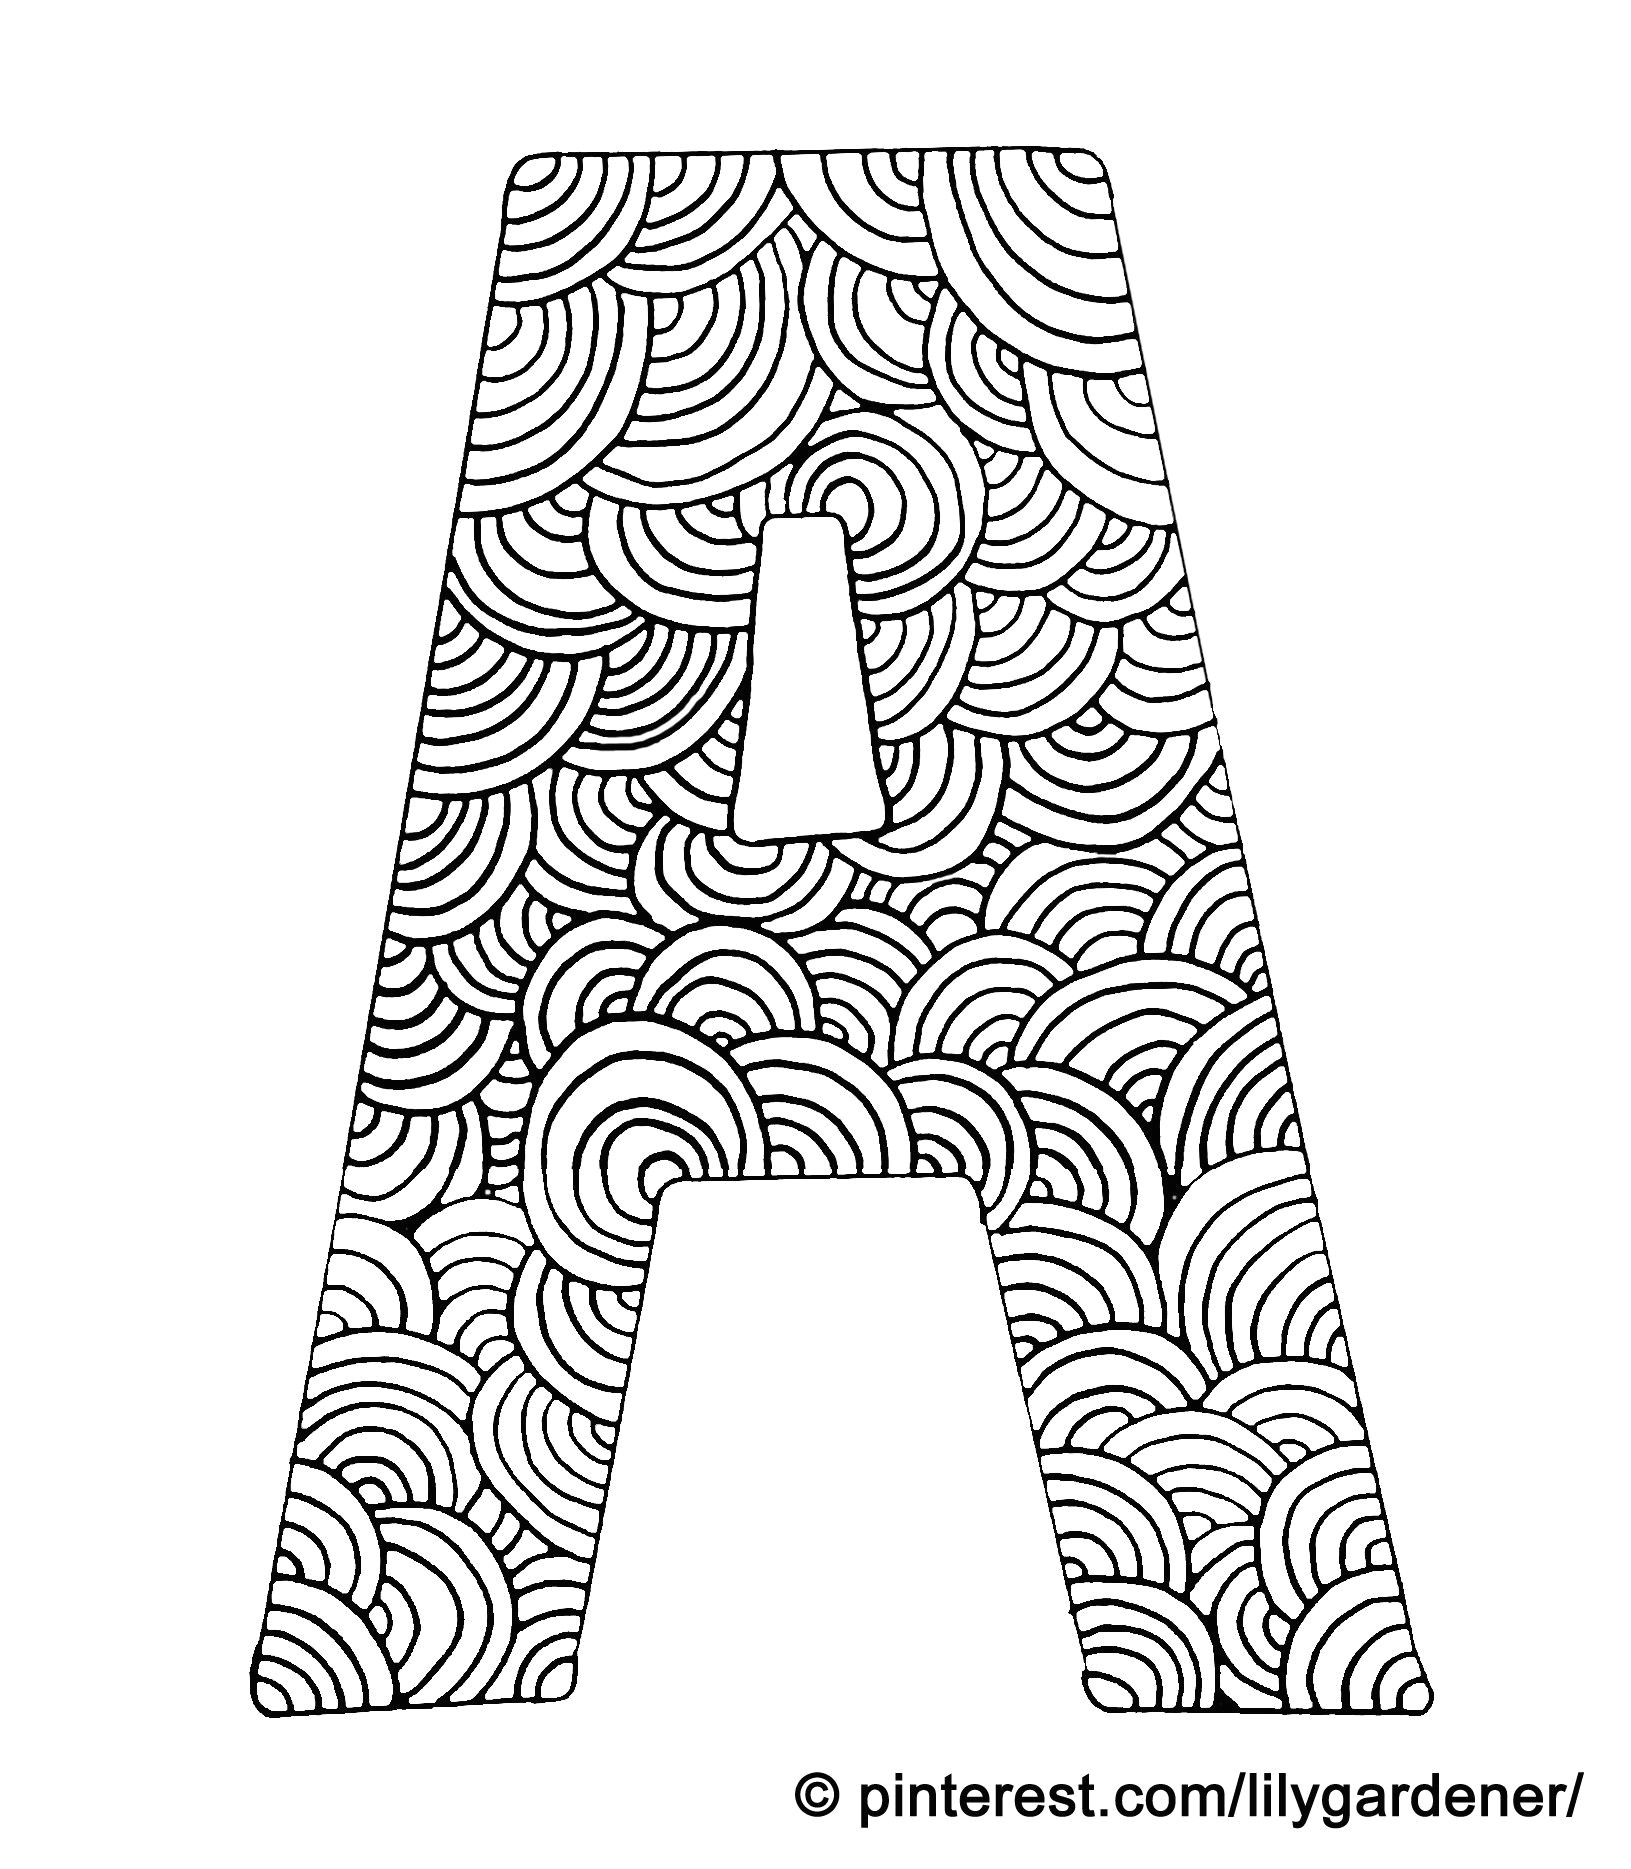 Letter Drawing Ideas Coloring Page Letter A with Pattern Of Circles Coloring for